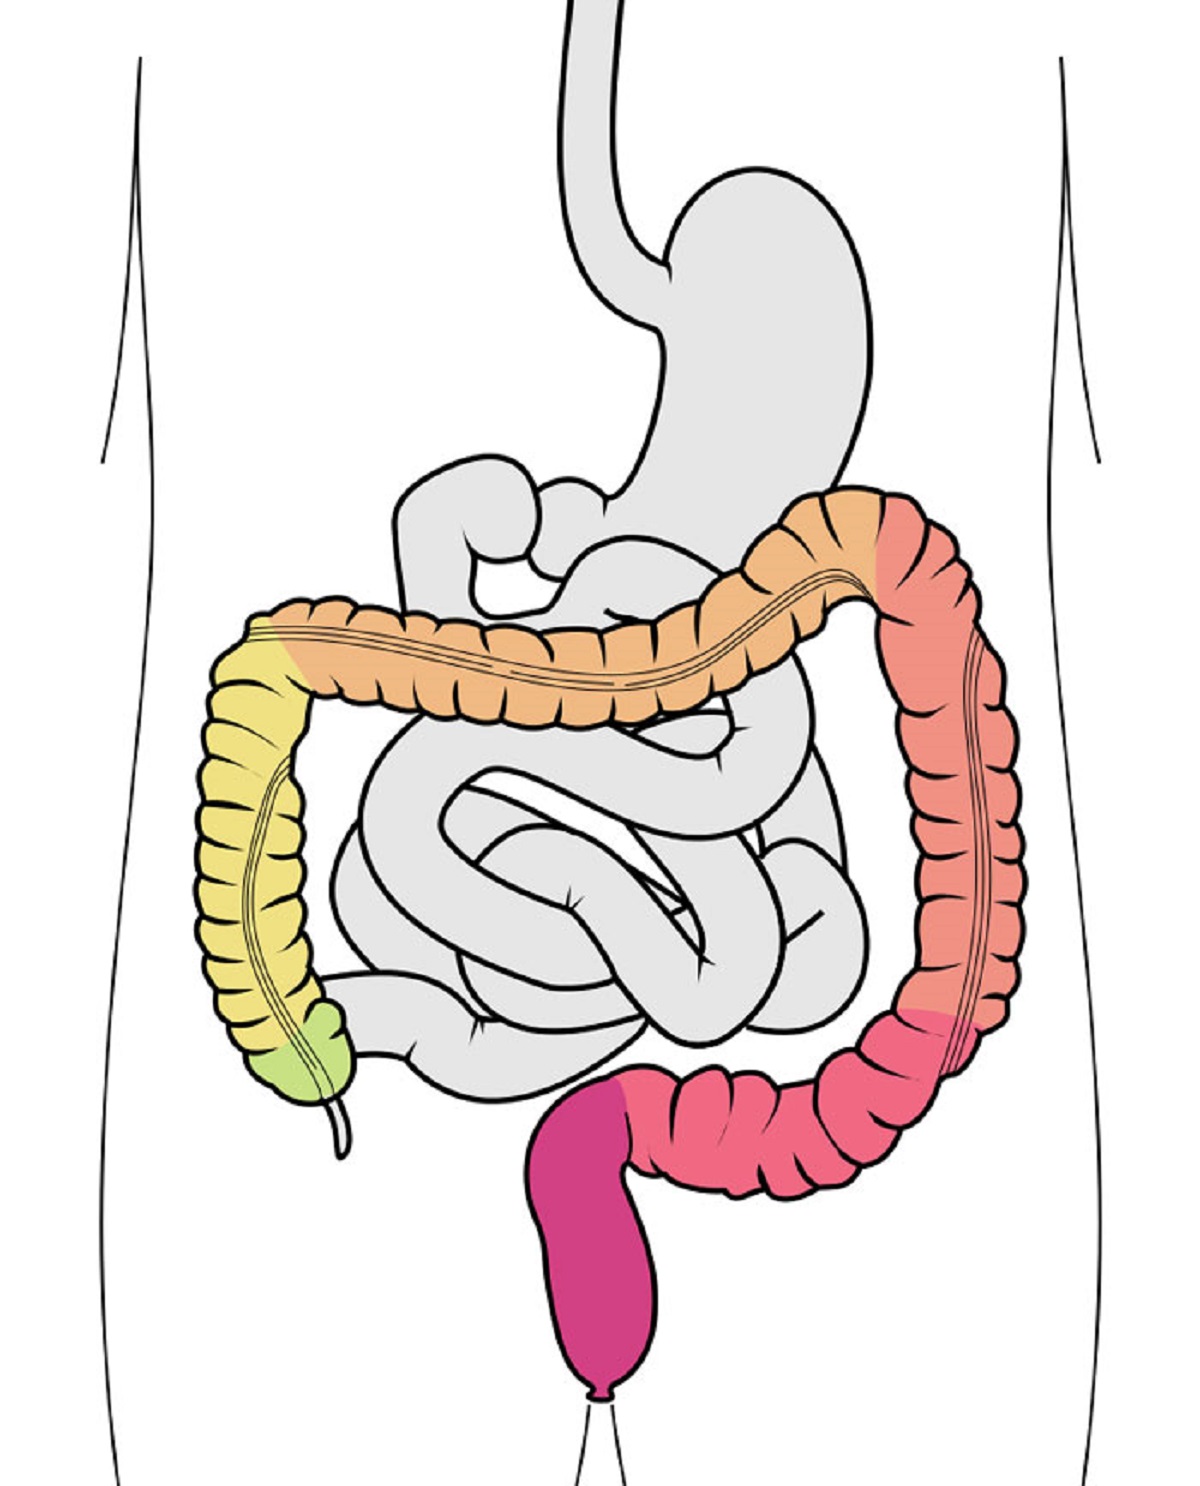 Your intestines "know" what shape they're supposed to be in, and can move themselves, which means gut surgeons can just stuff them back into you when they're done and they'll sort themselves out.